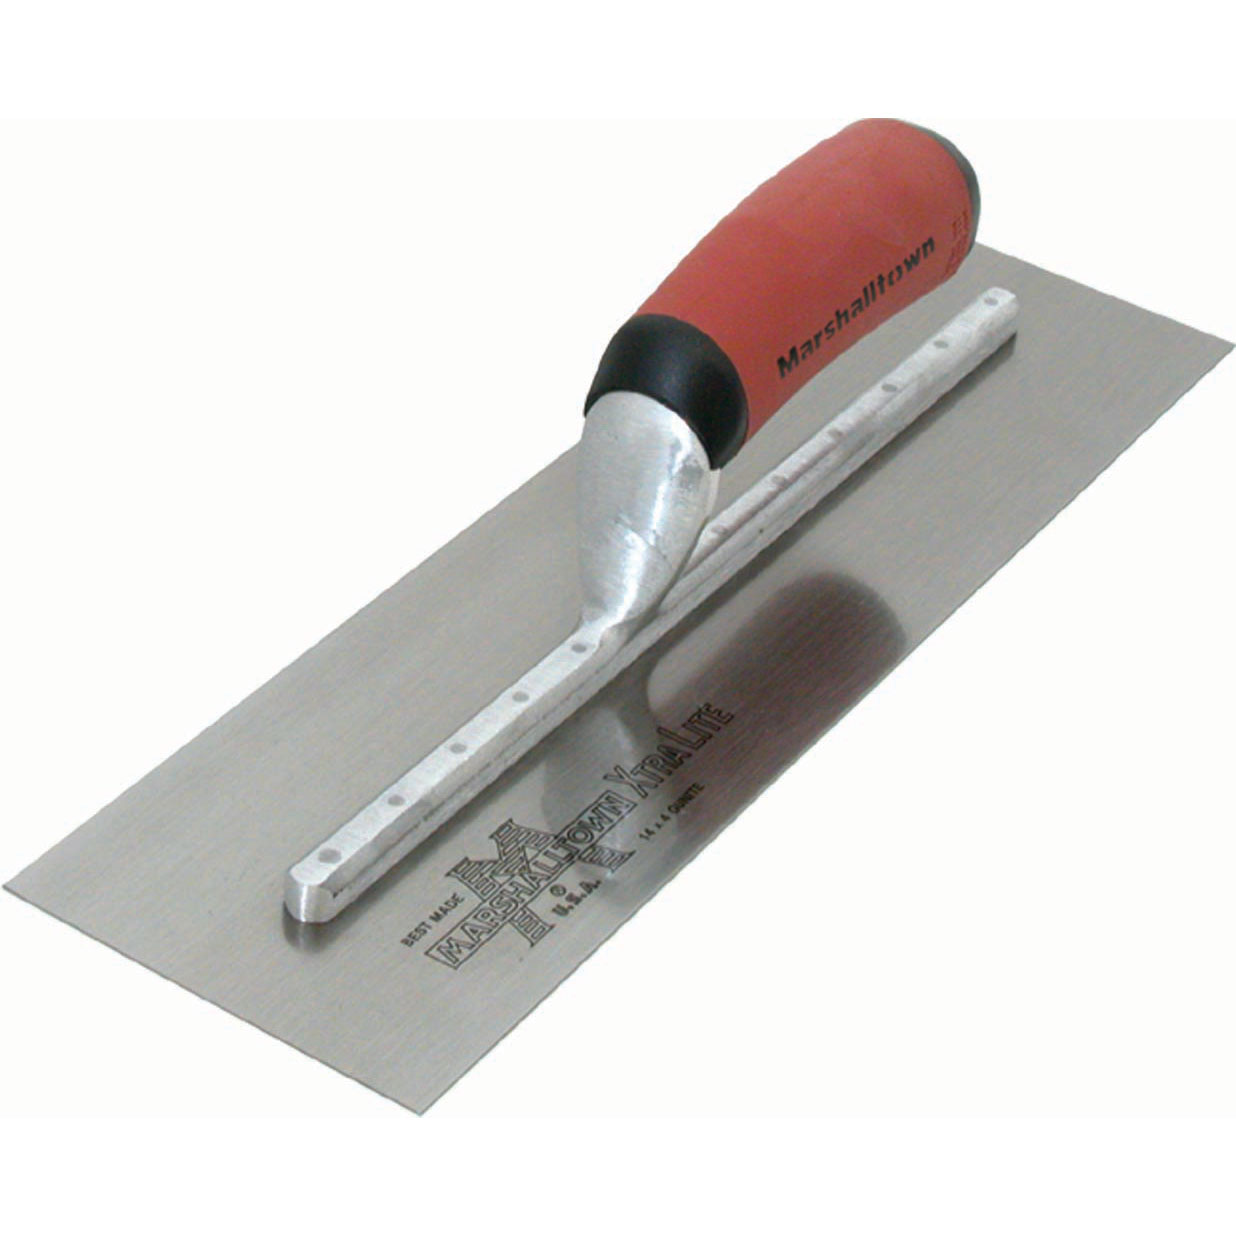 Marshalltown MXS64D 14in. x 4in. Finishing Trowel Curved DuraSoft Handle MAT-MXS64D